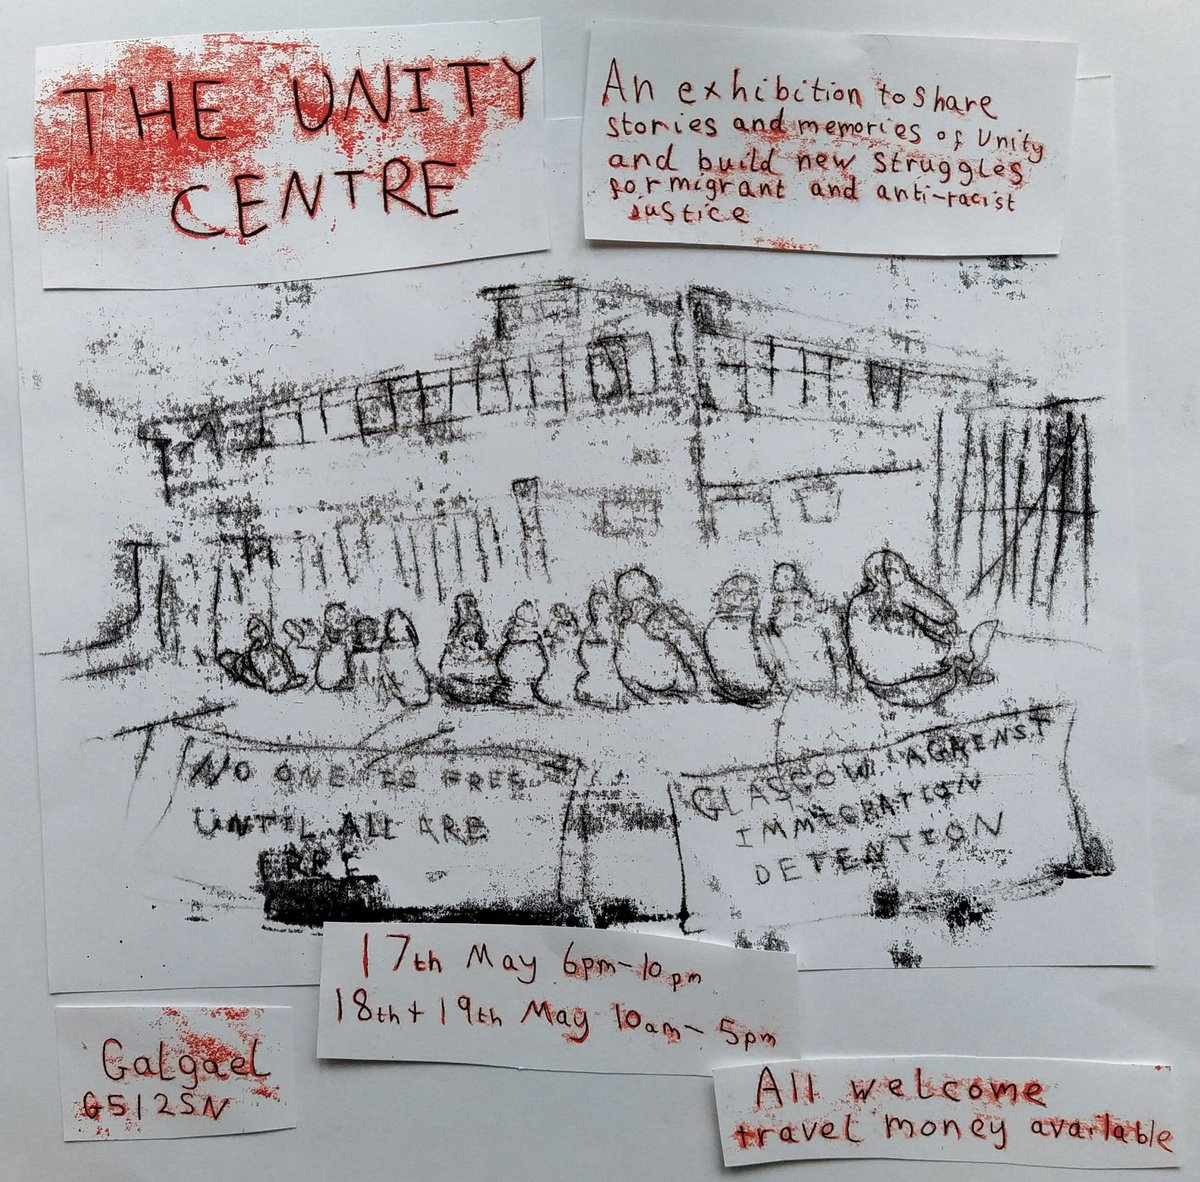 This weekend : Unity Centre Exhibition - come share stories & memories of Unity and build new struggles for migrant and anti-racist justice. At Galgael, 15 Fairley St, G51 2SN (use entrance round back) Fri 17th 6-10pm (opening event with food + music), Sat/Sun 18-19th 10-5pm